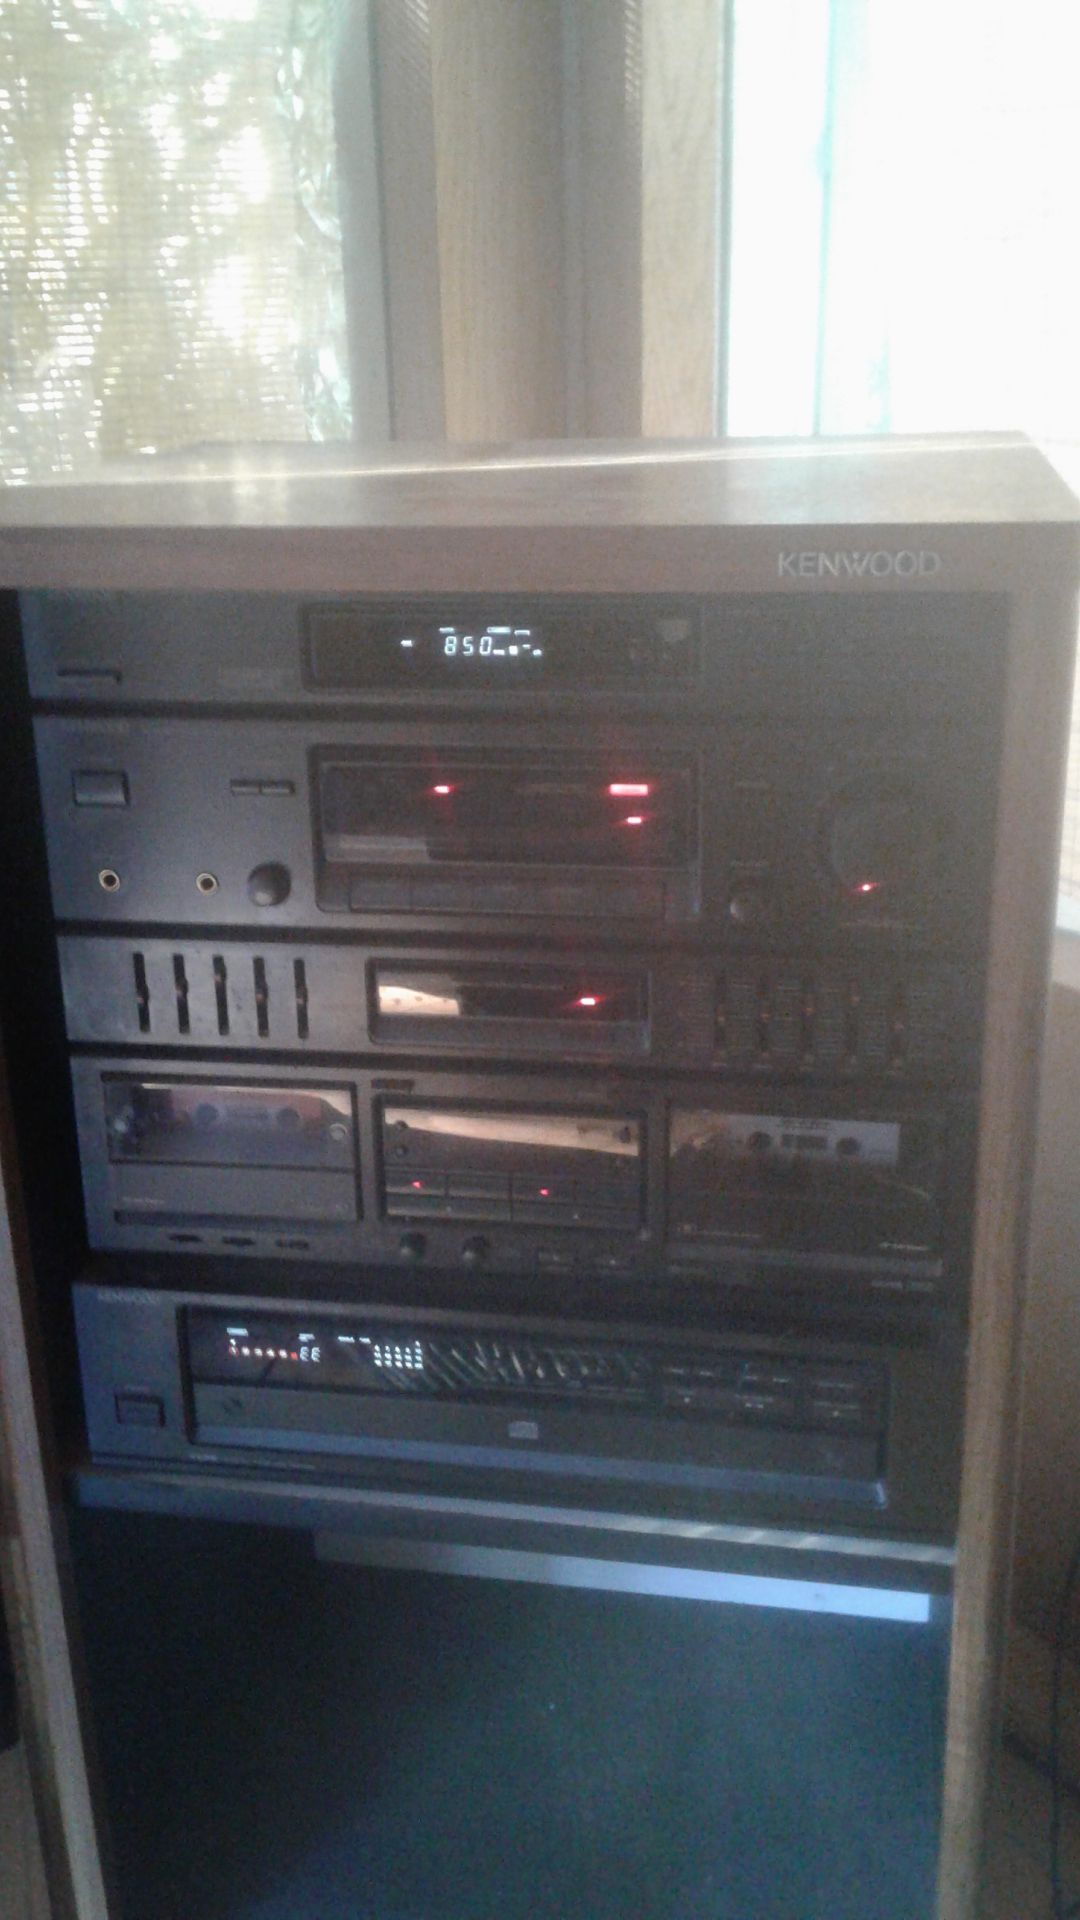 Old Kenwood stereo